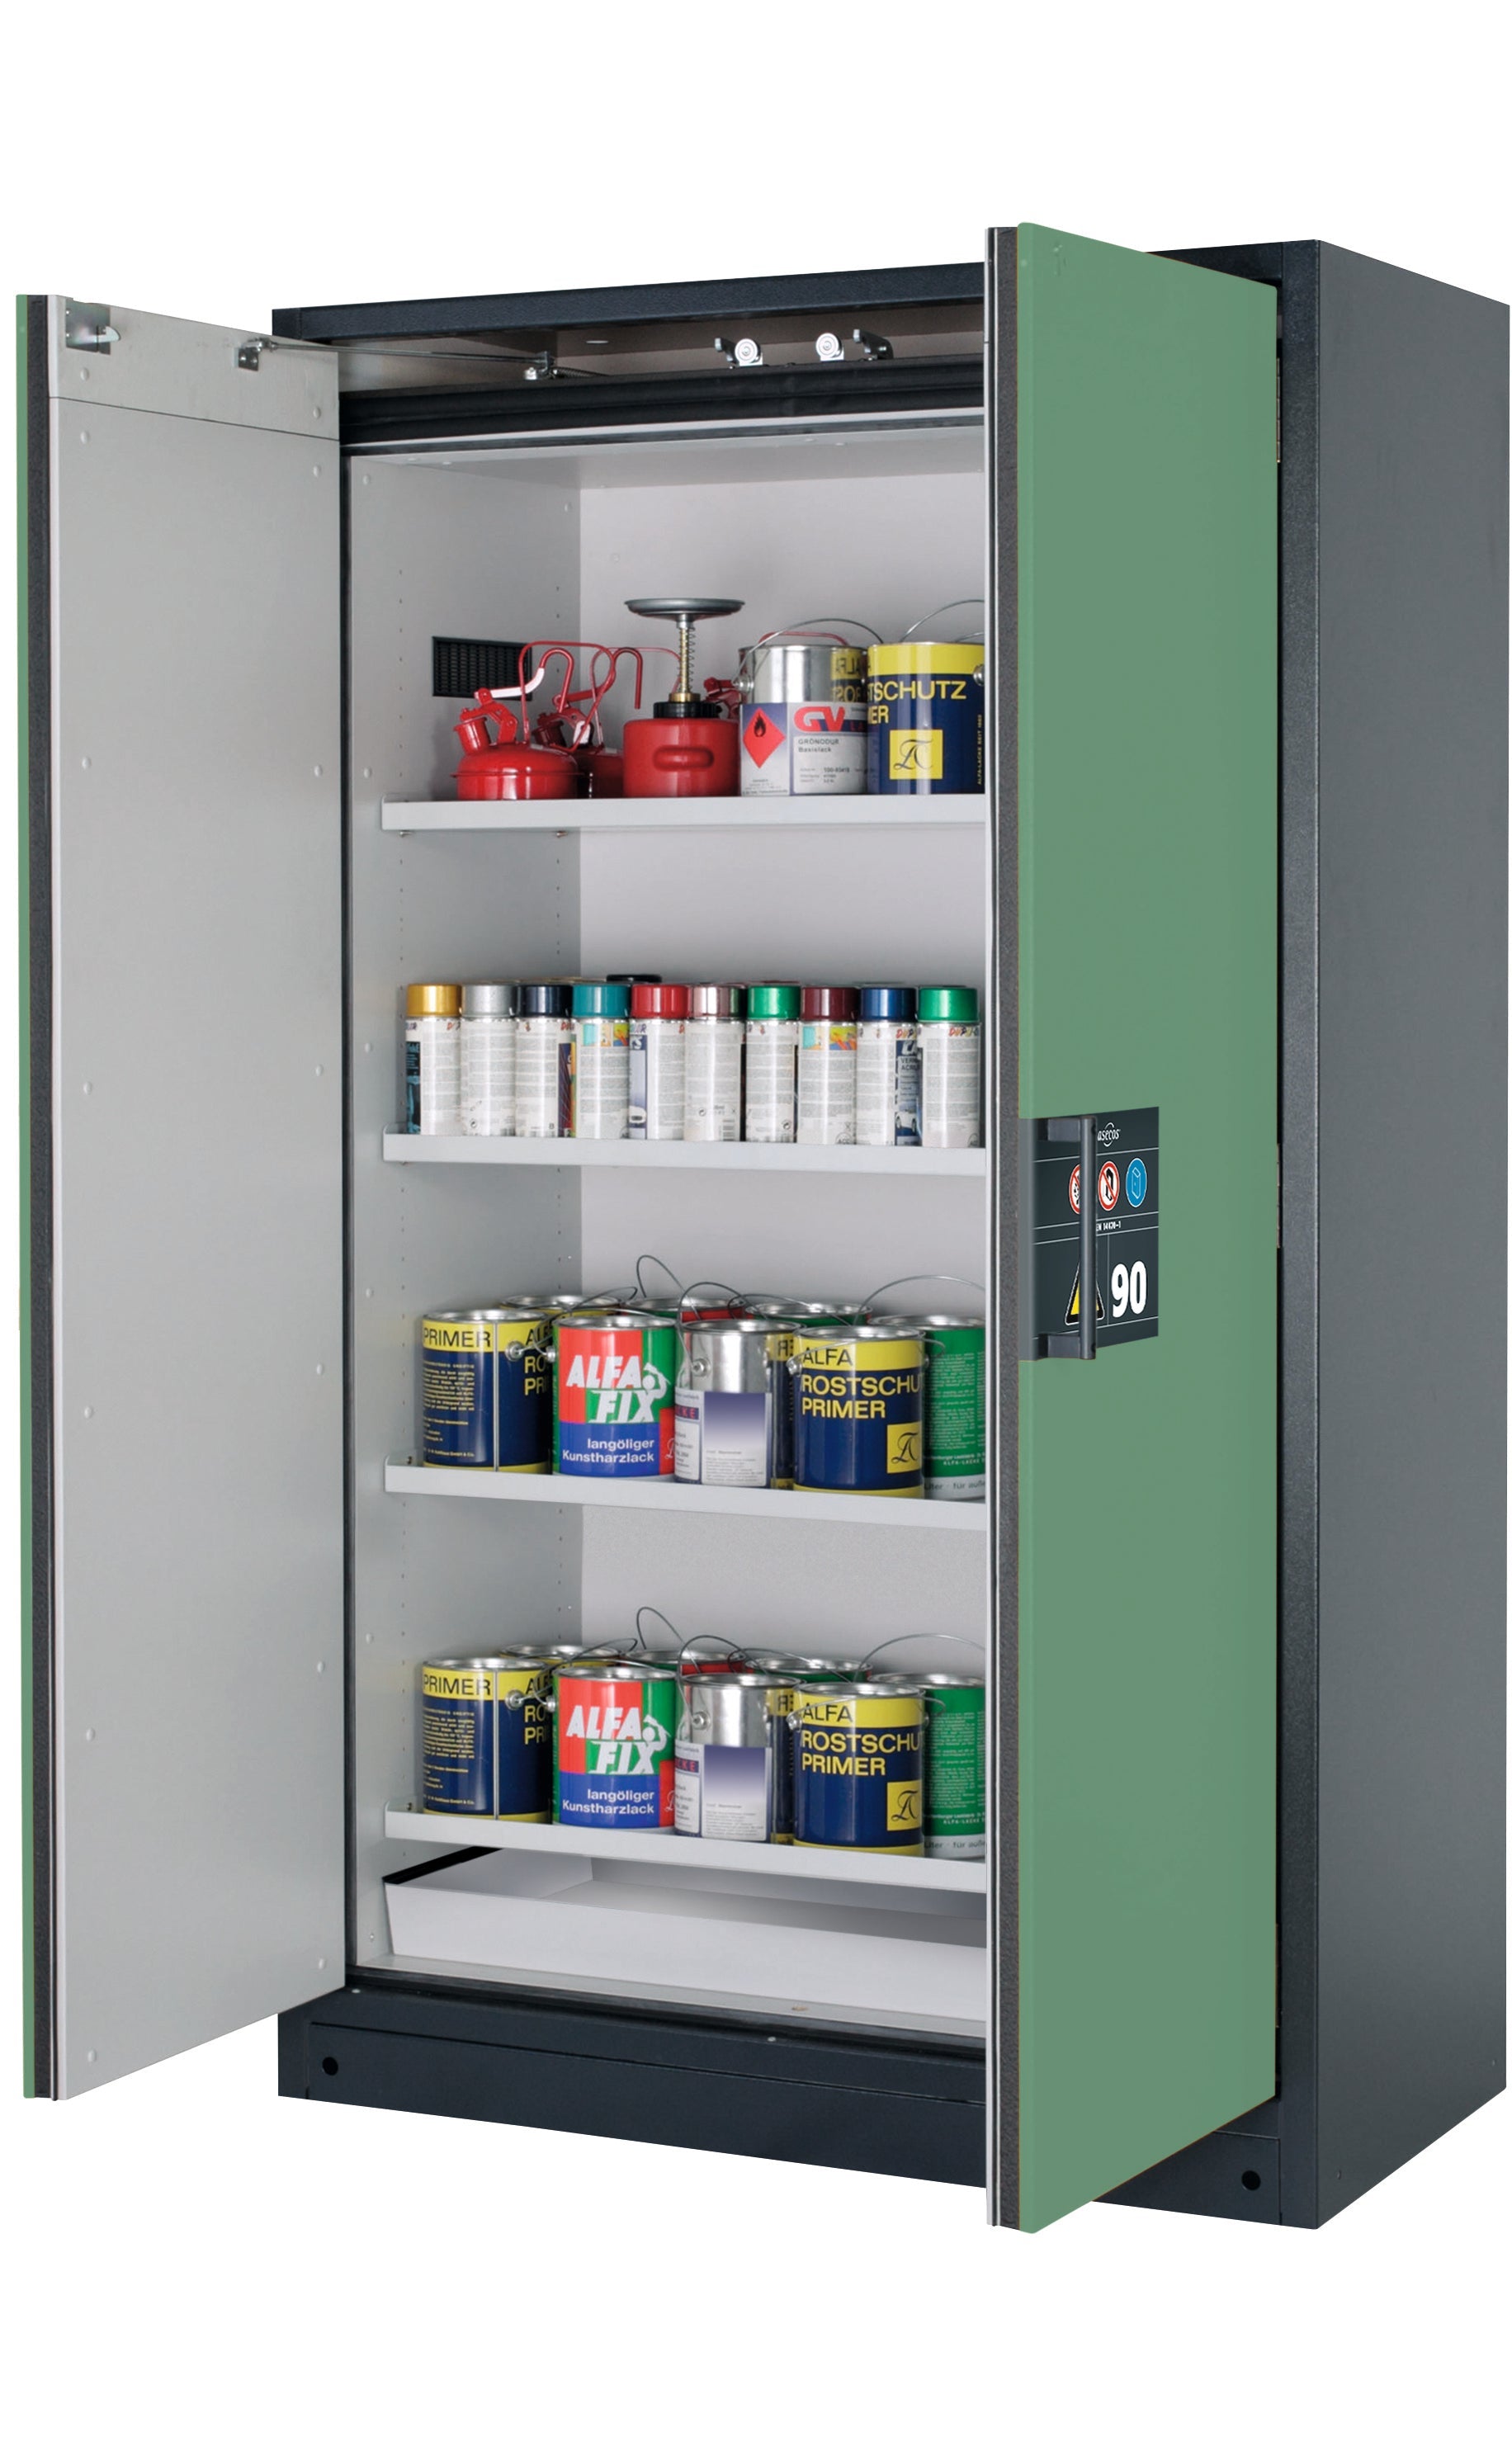 Type 90 safety storage cabinet Q-CLASSIC-90 model Q90.195.120 in reseda green RAL 6011 with 4x shelf standard (sheet steel),